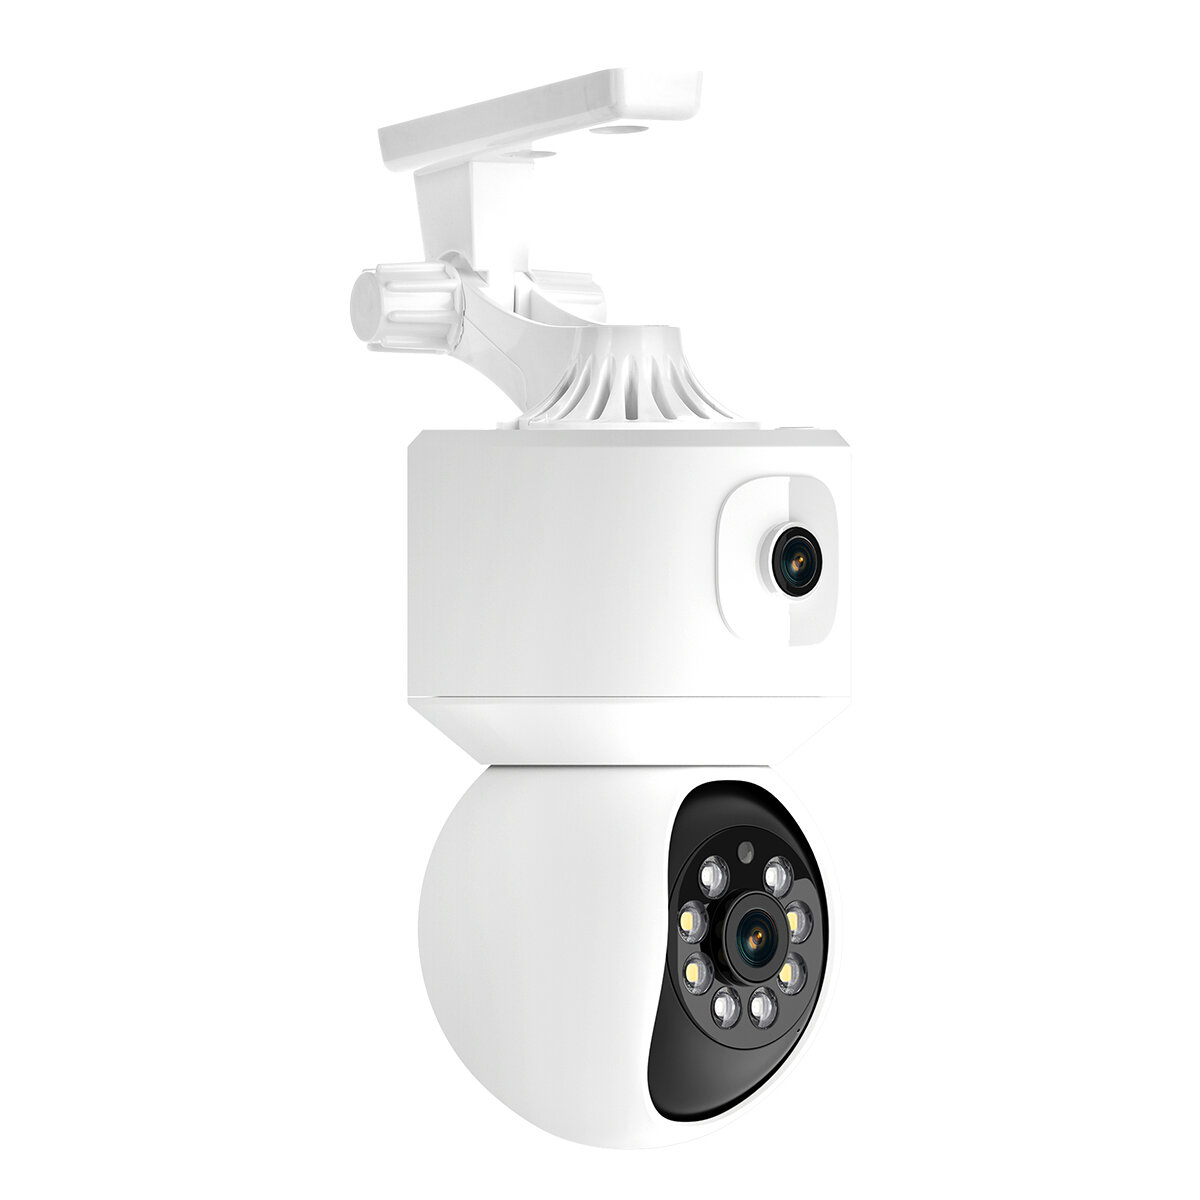 

ESCAM QF010 2x2MP Two Lens Dual Perspectives Pan/Tilt Motion Detection Cloud Storage Waterproof WiFi IP Camera with Two